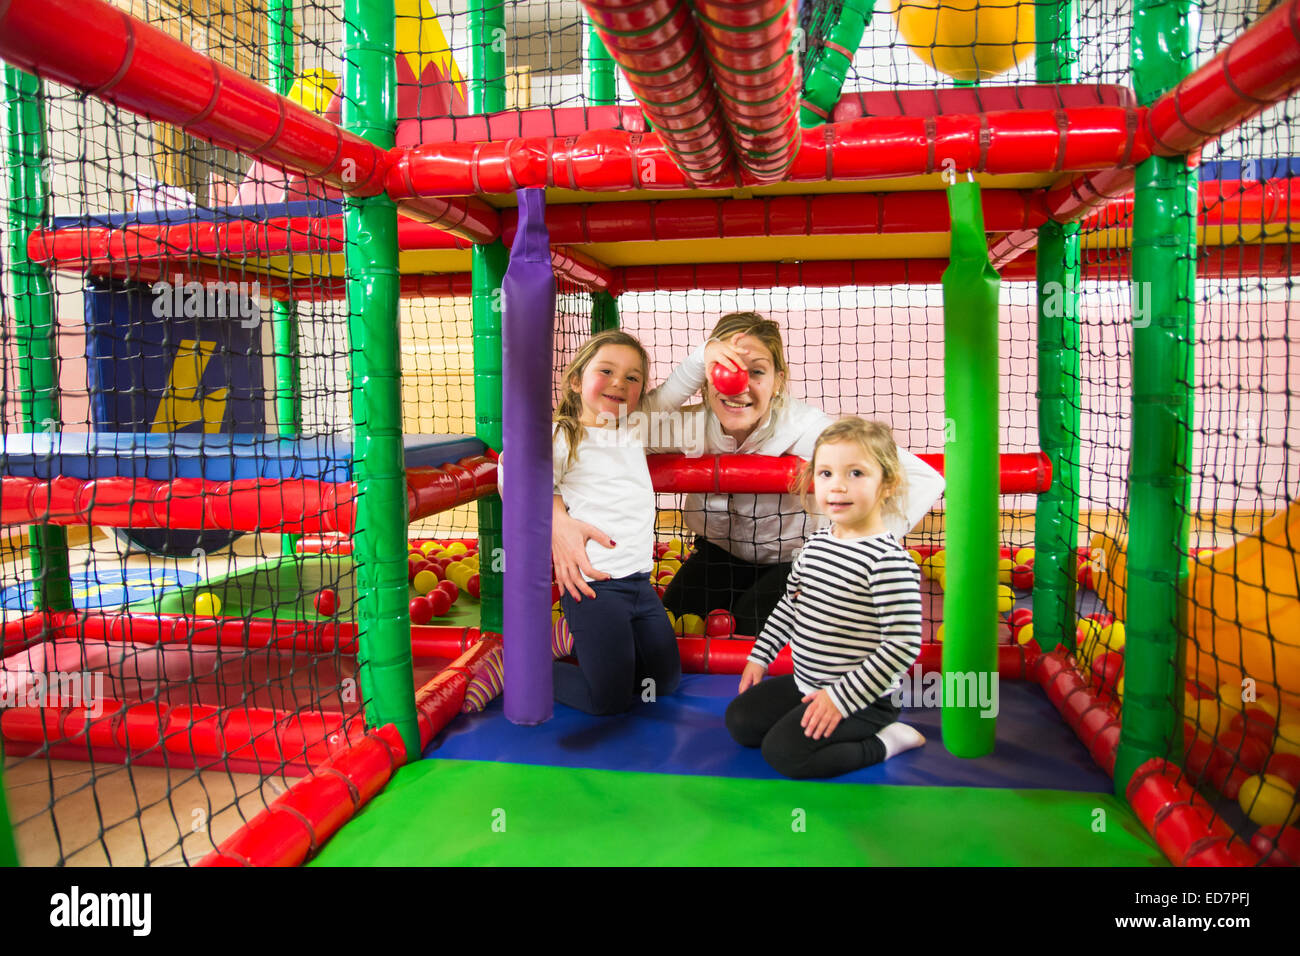 Family into indoor playroom Stock Photo